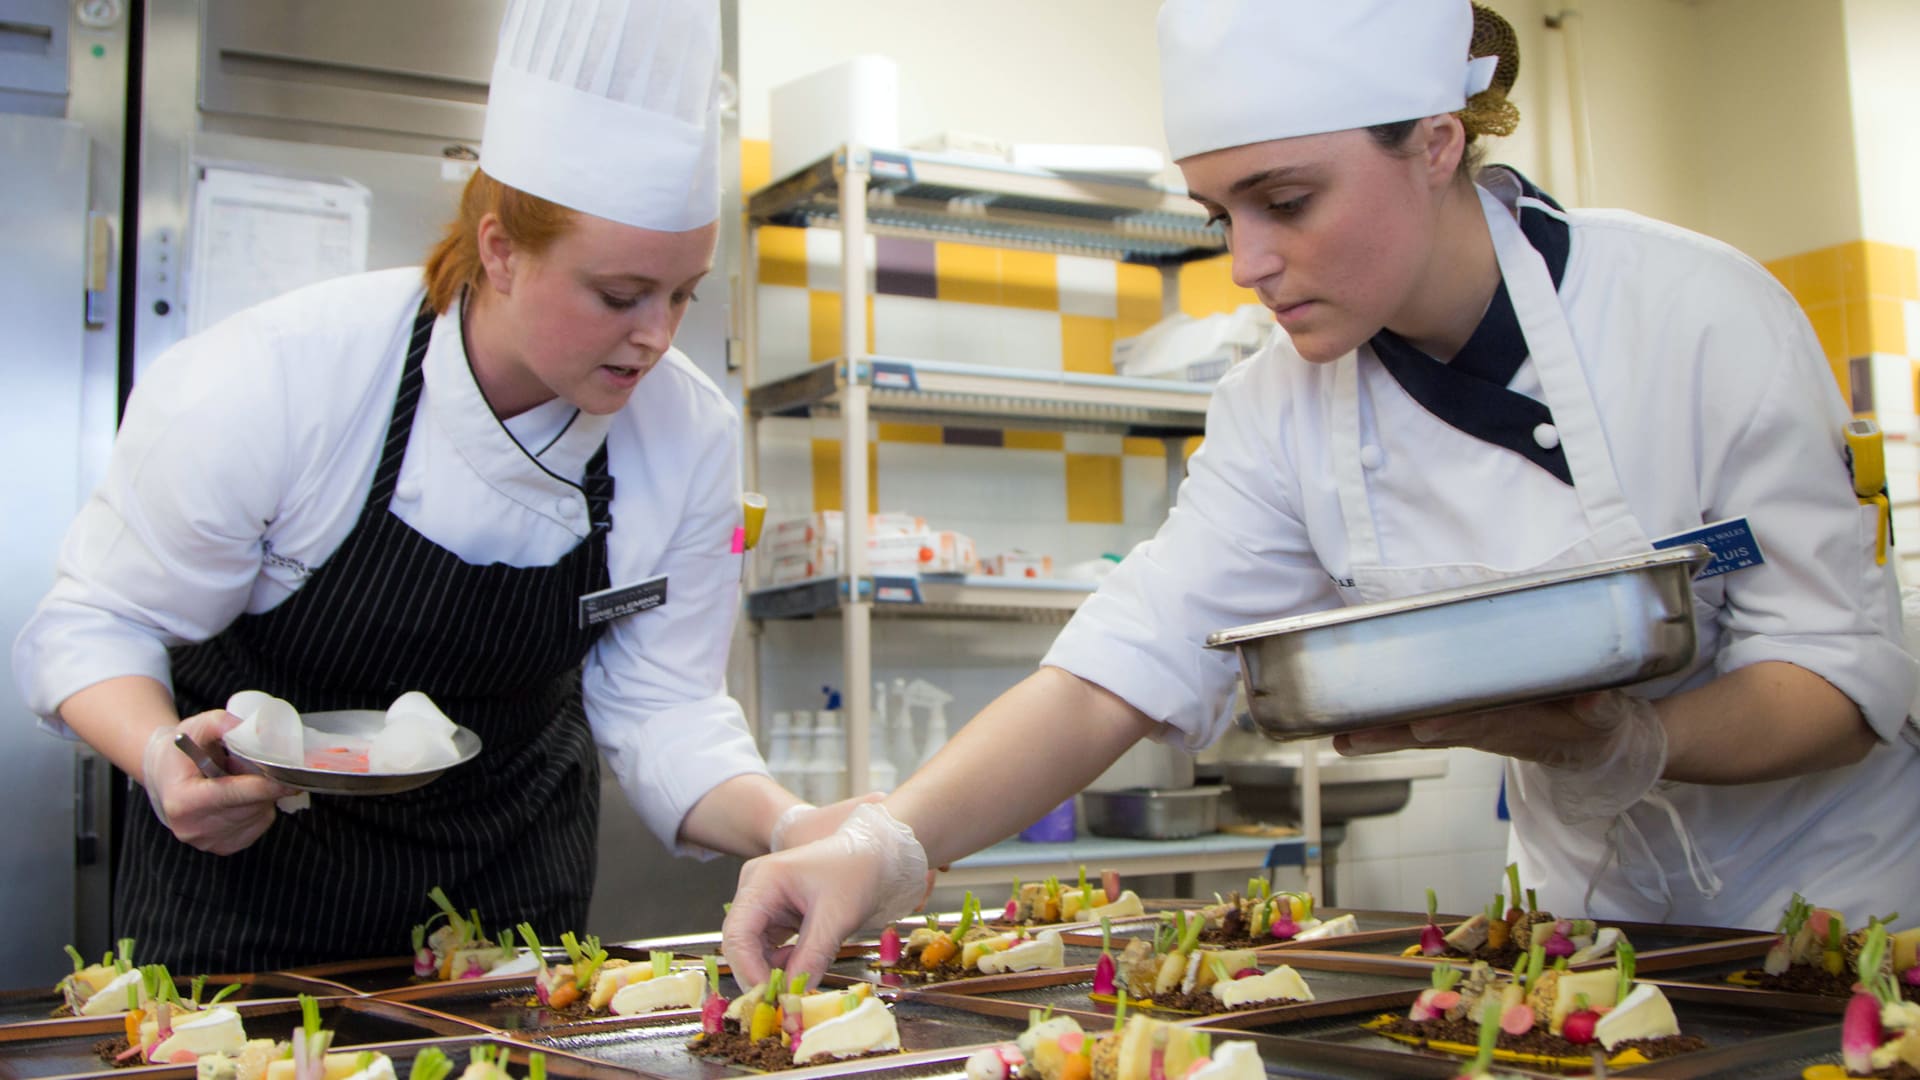 Students put the finishing touches on plated food.